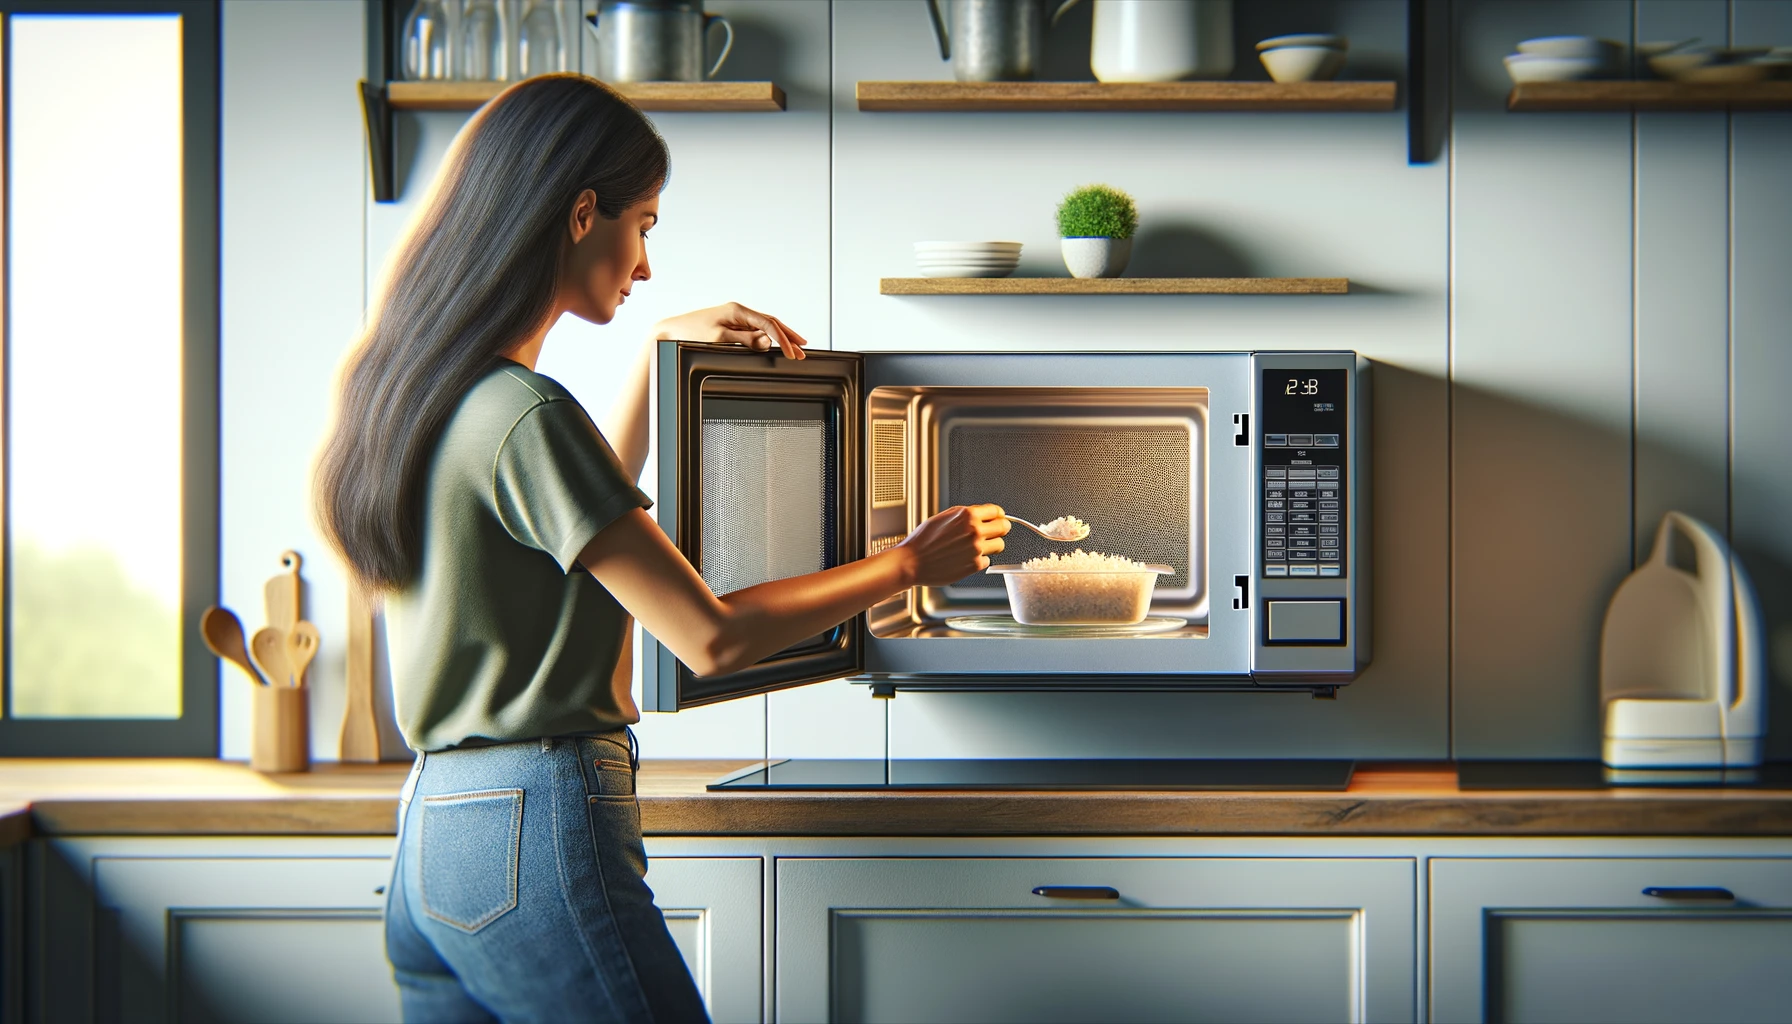 Safely using a microwave oven